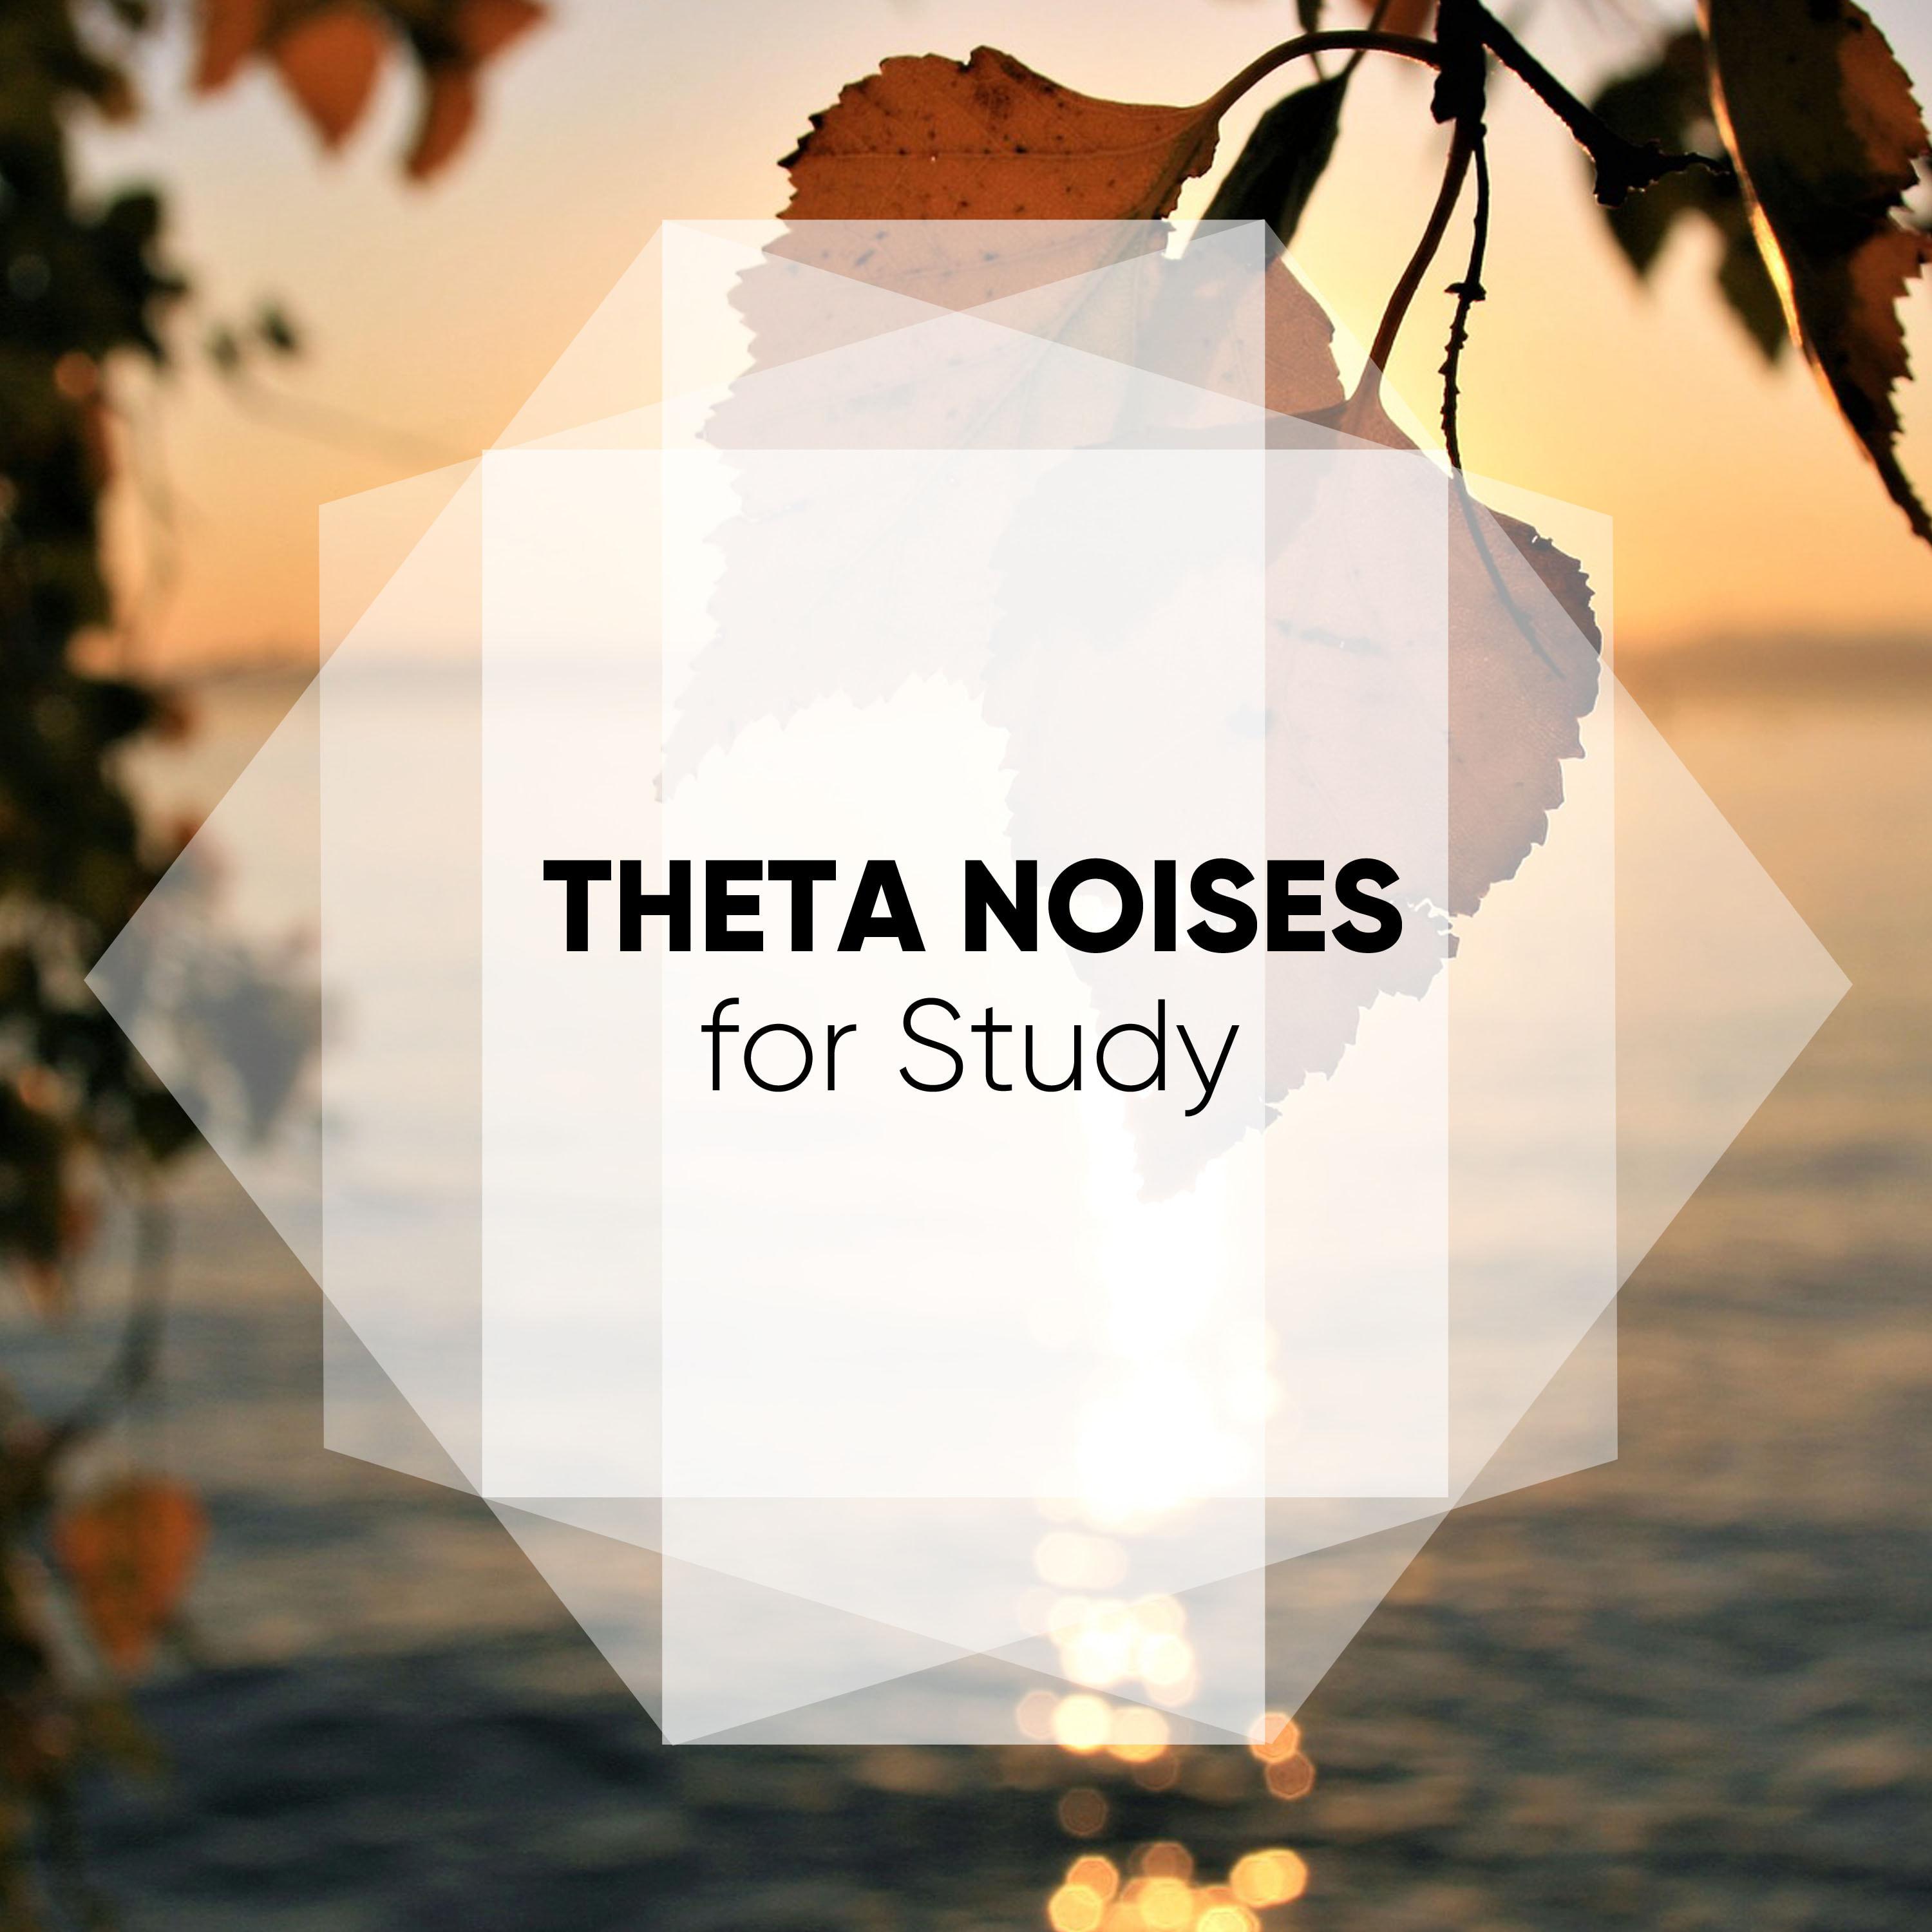 Theta Noises for Study & Concentration